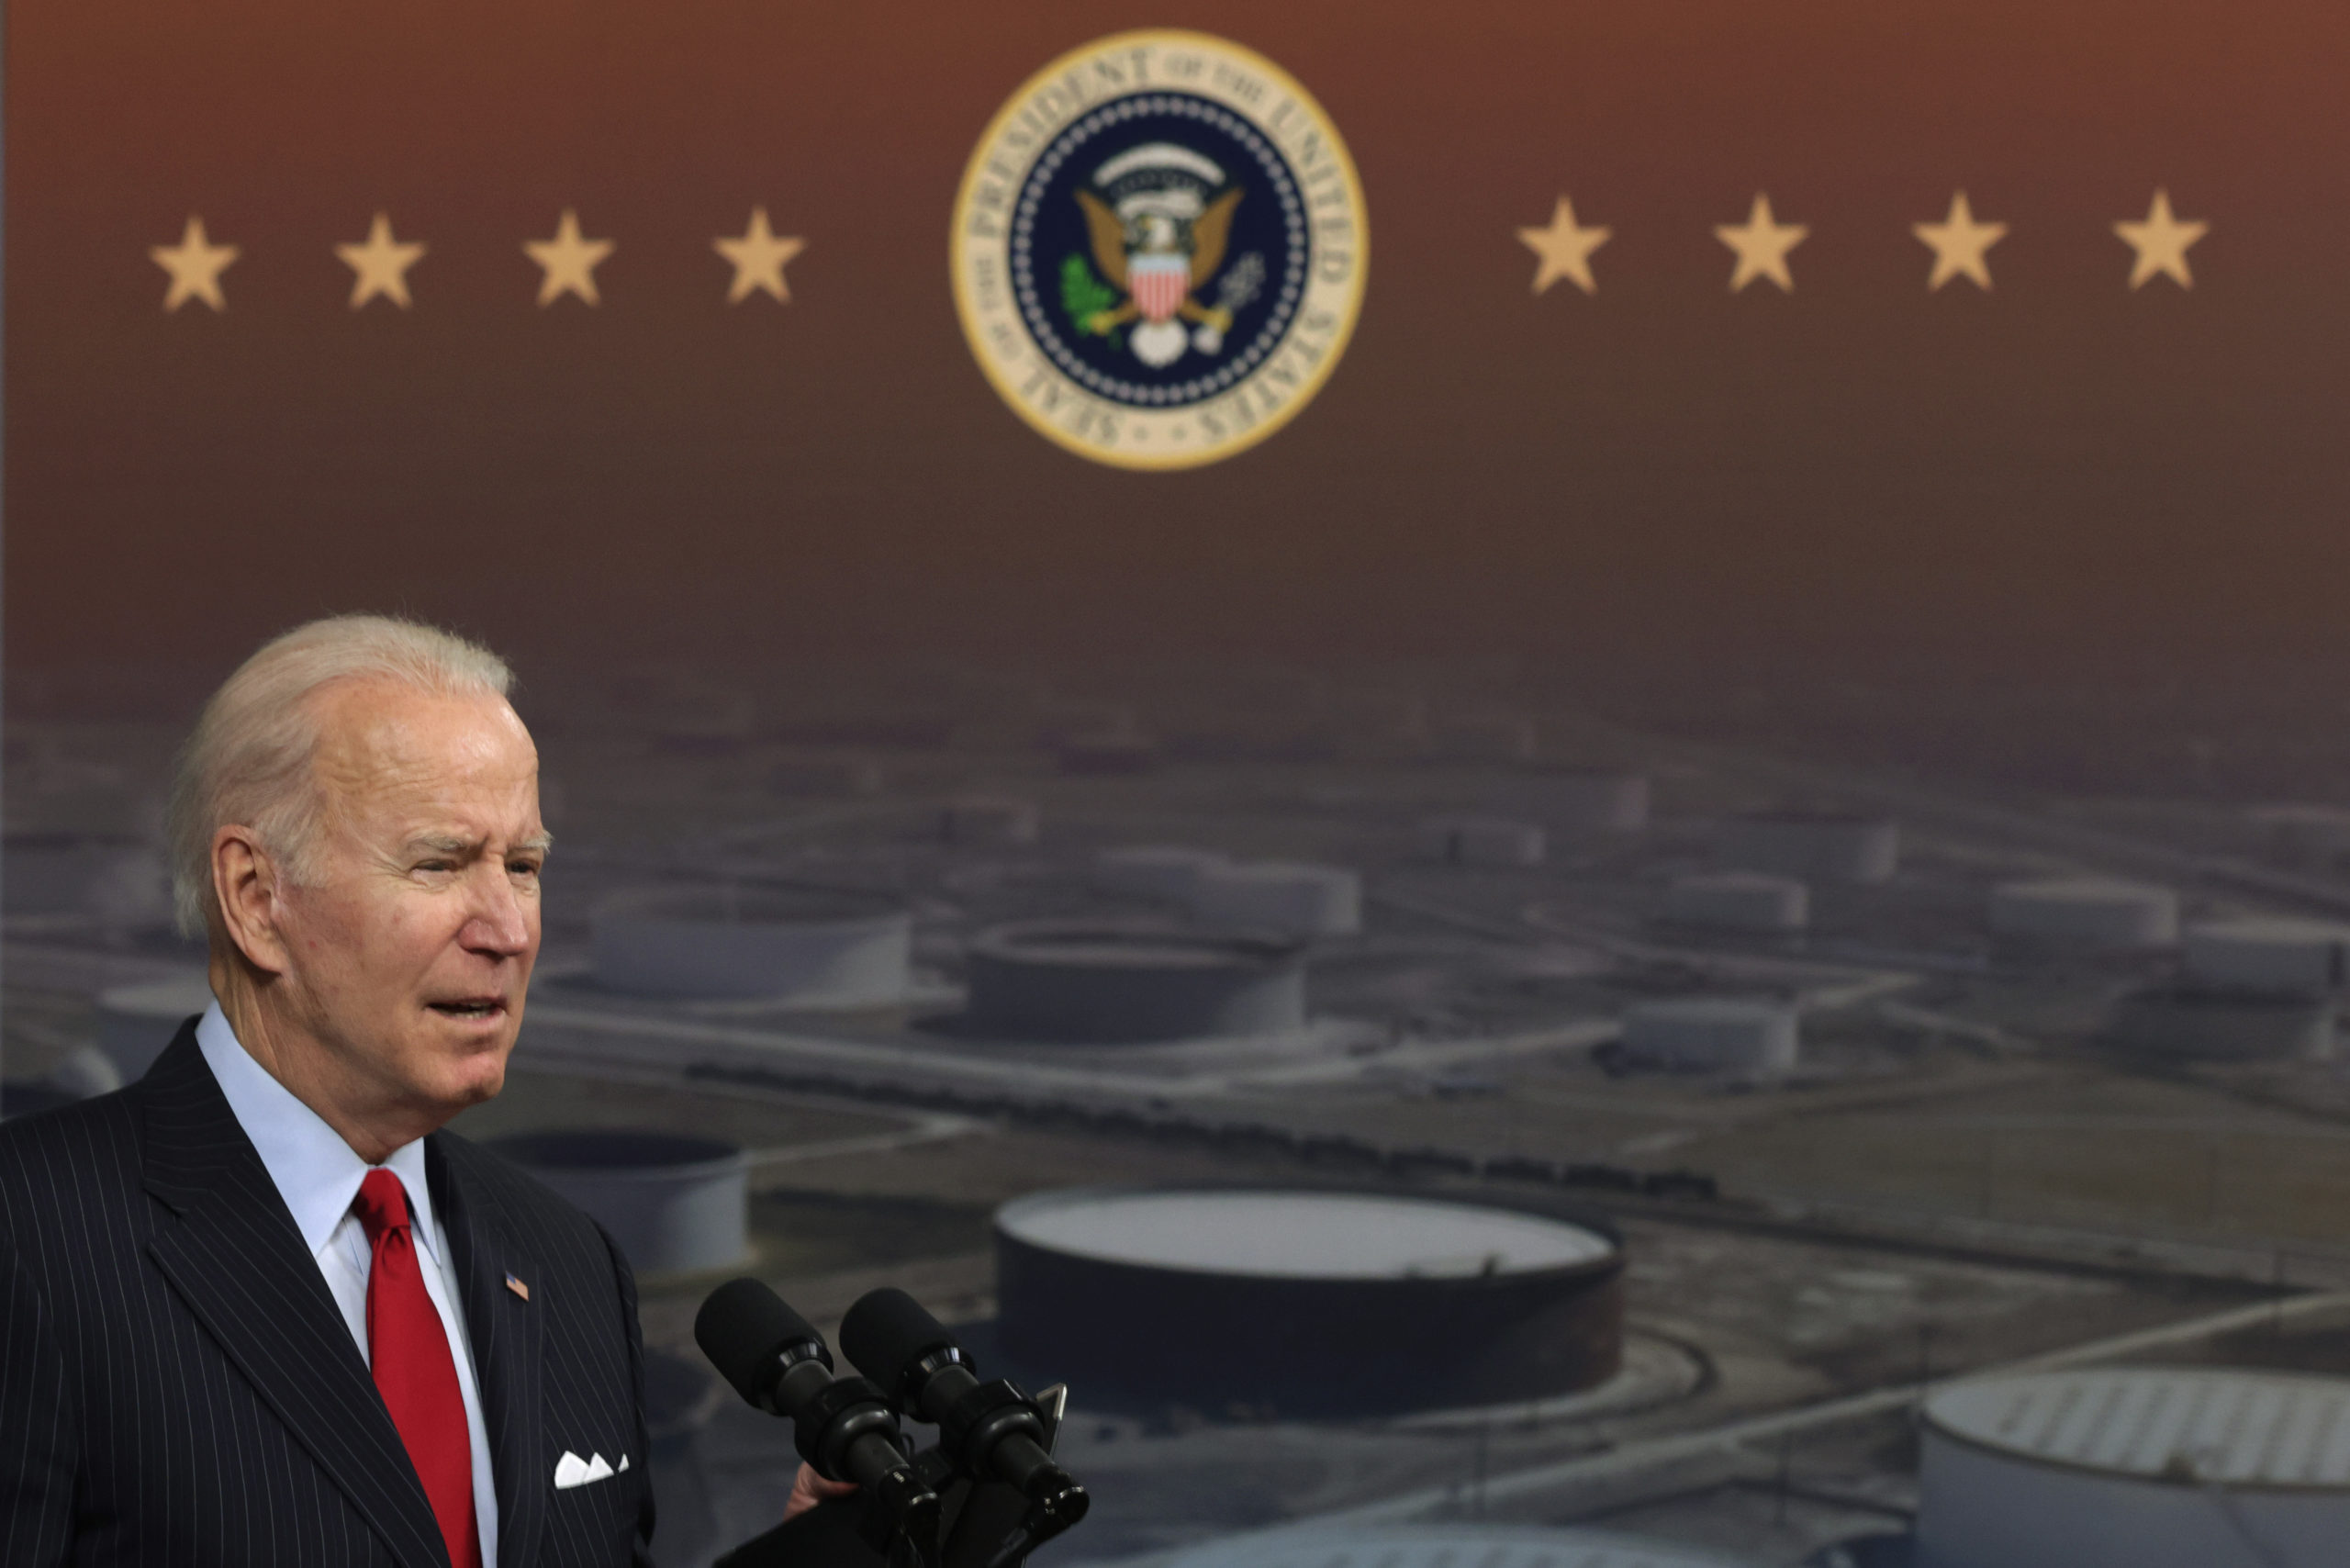 President Joe Biden speaks on the economy during an event at the White House on Nov. 23. (Alex Wong/Getty Images)